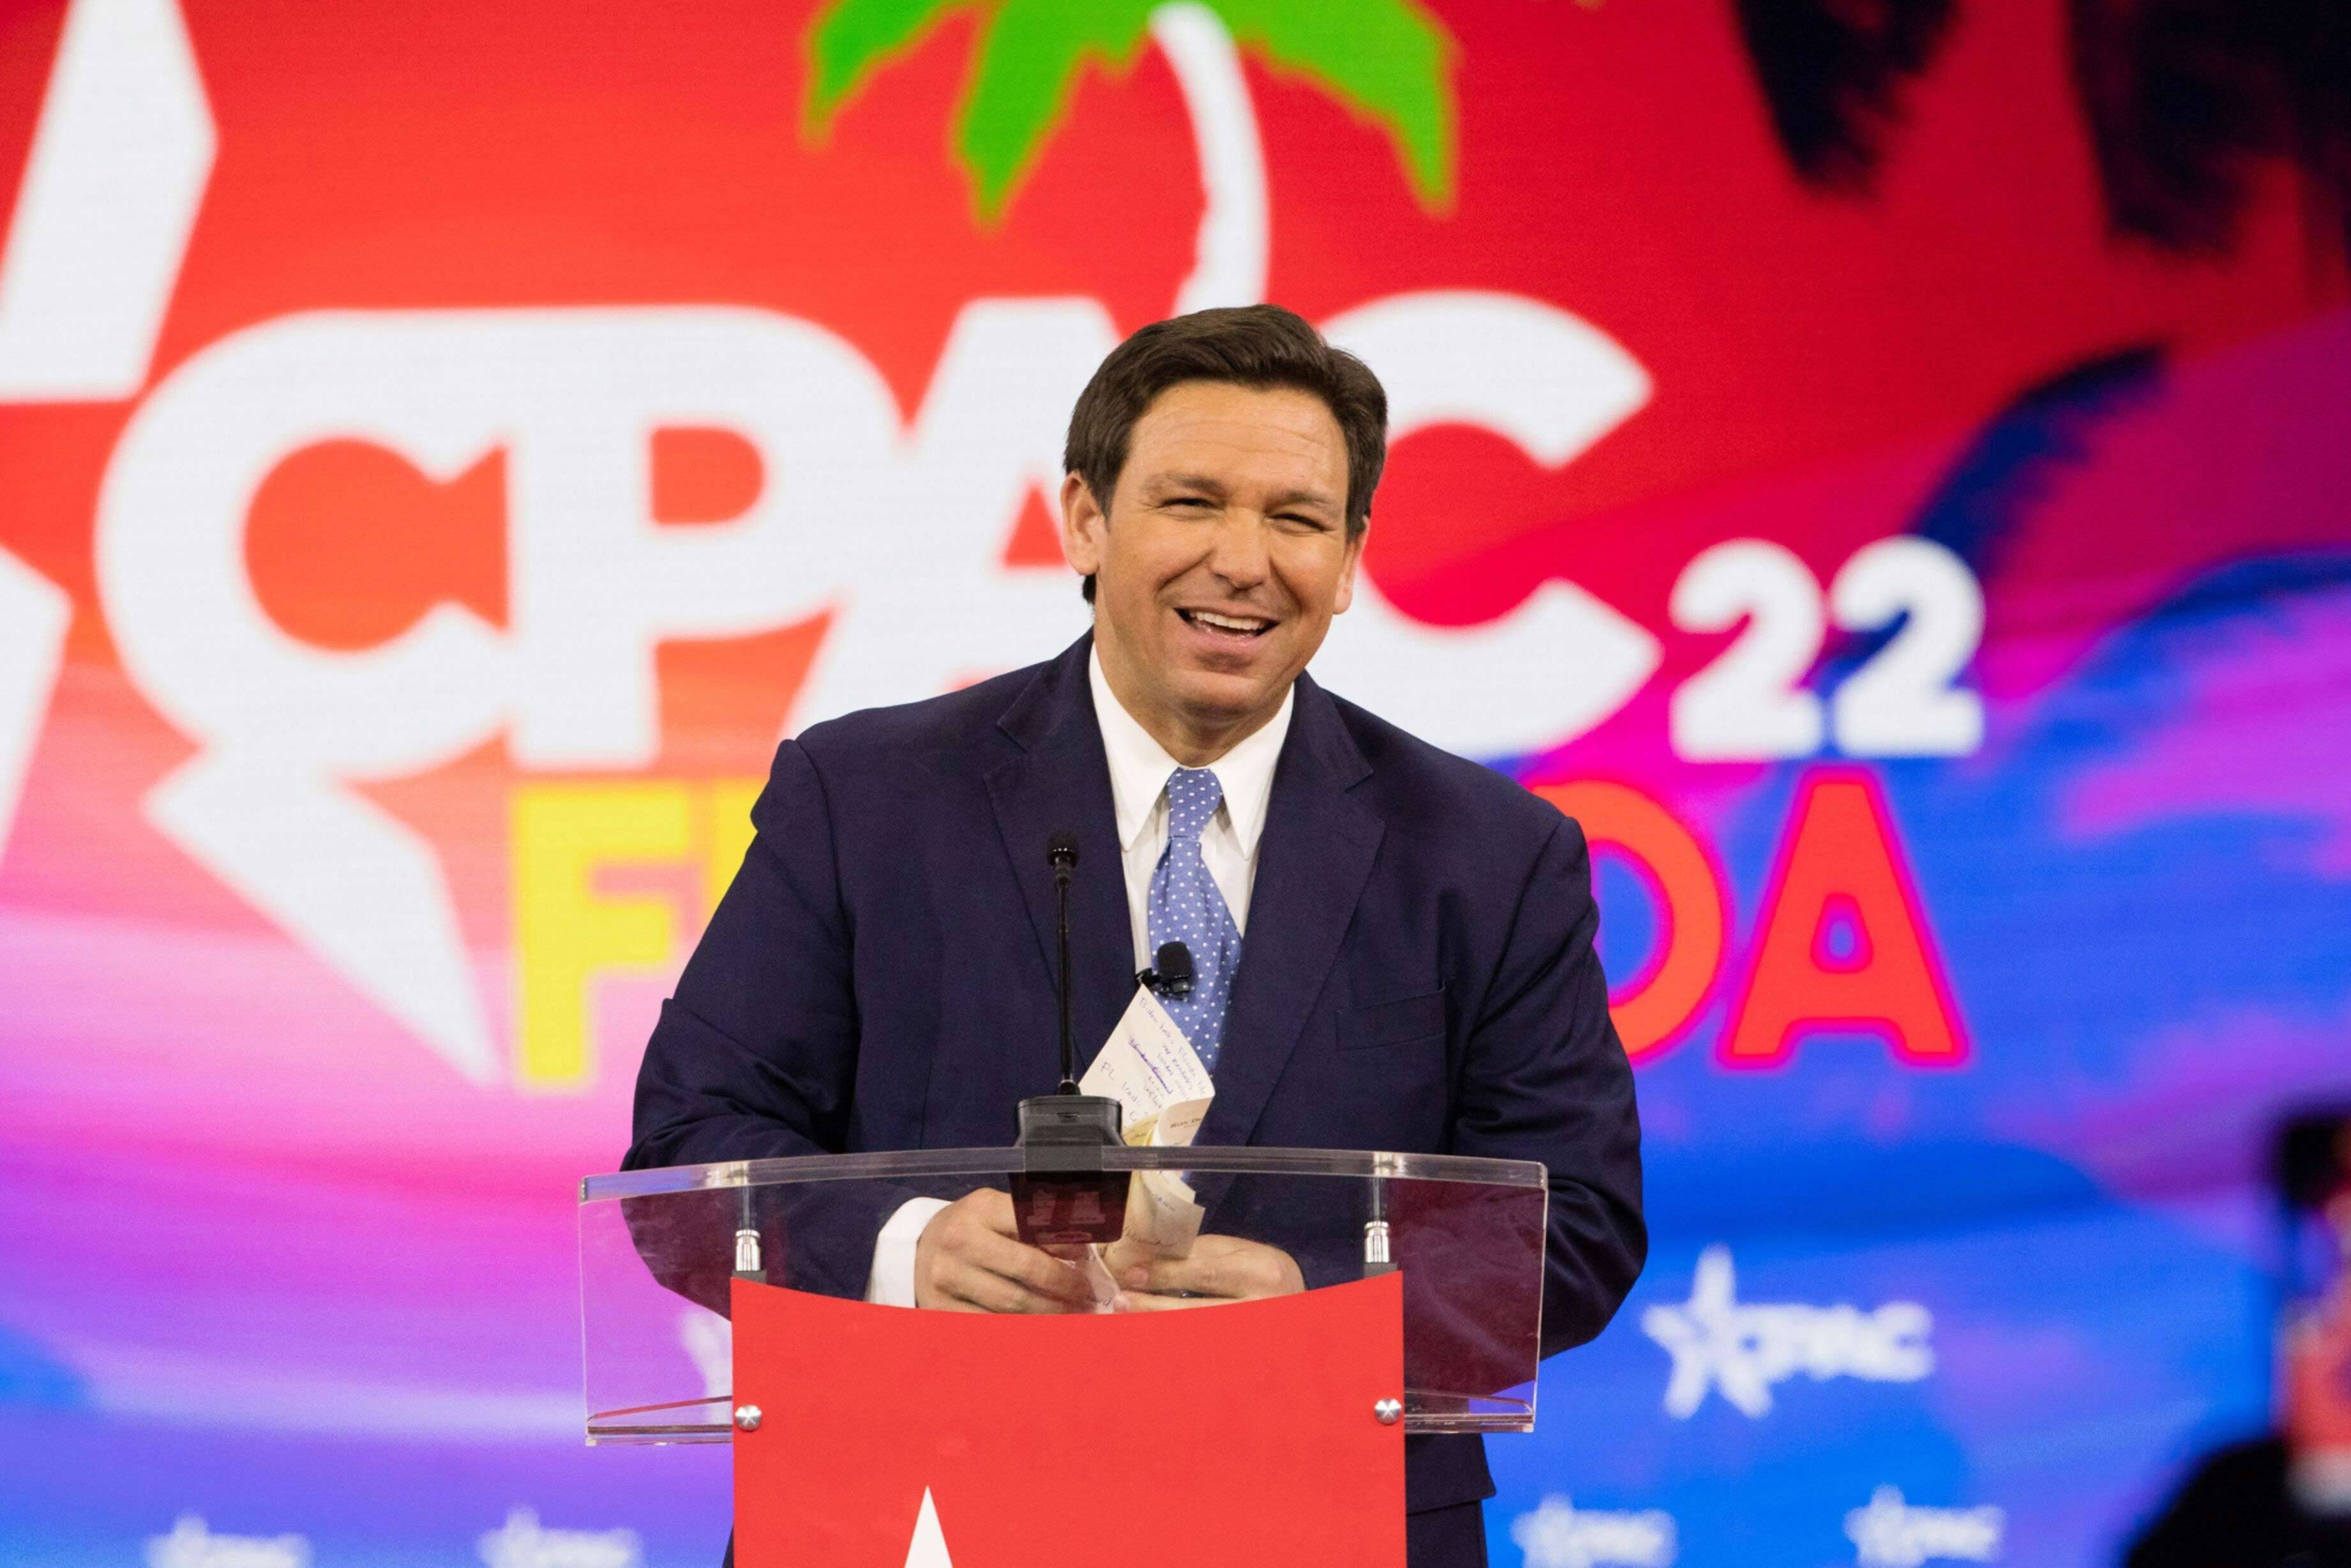 Florida Governor Ron DeSantis at the Conservative Political Action Conference in Orlando on Feb. 24.